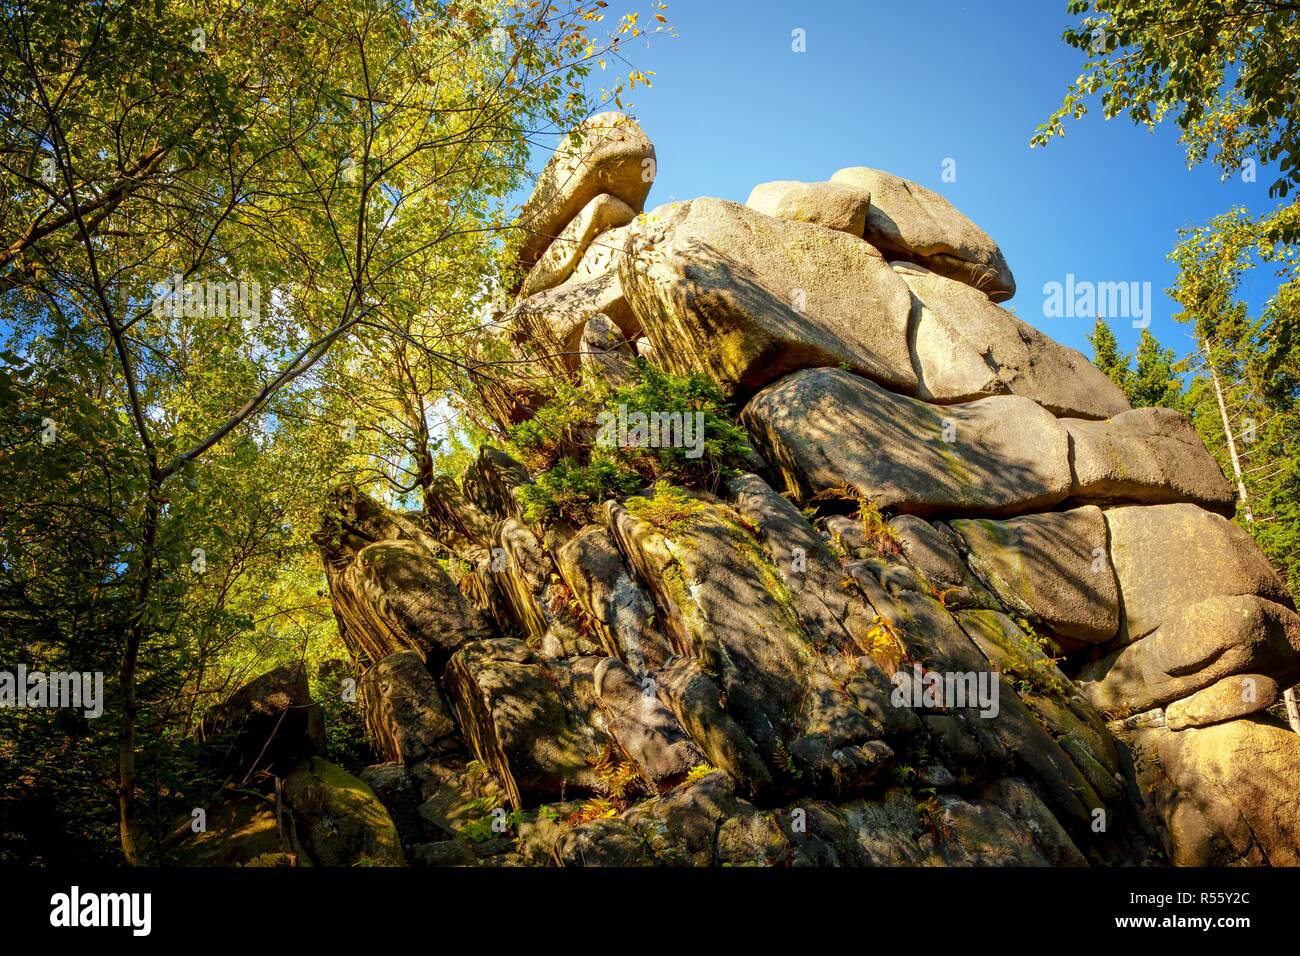 Rock formation with bizarre structures in the mountain forest. Seen in the Harz Mountains in Germany. Stock Photo